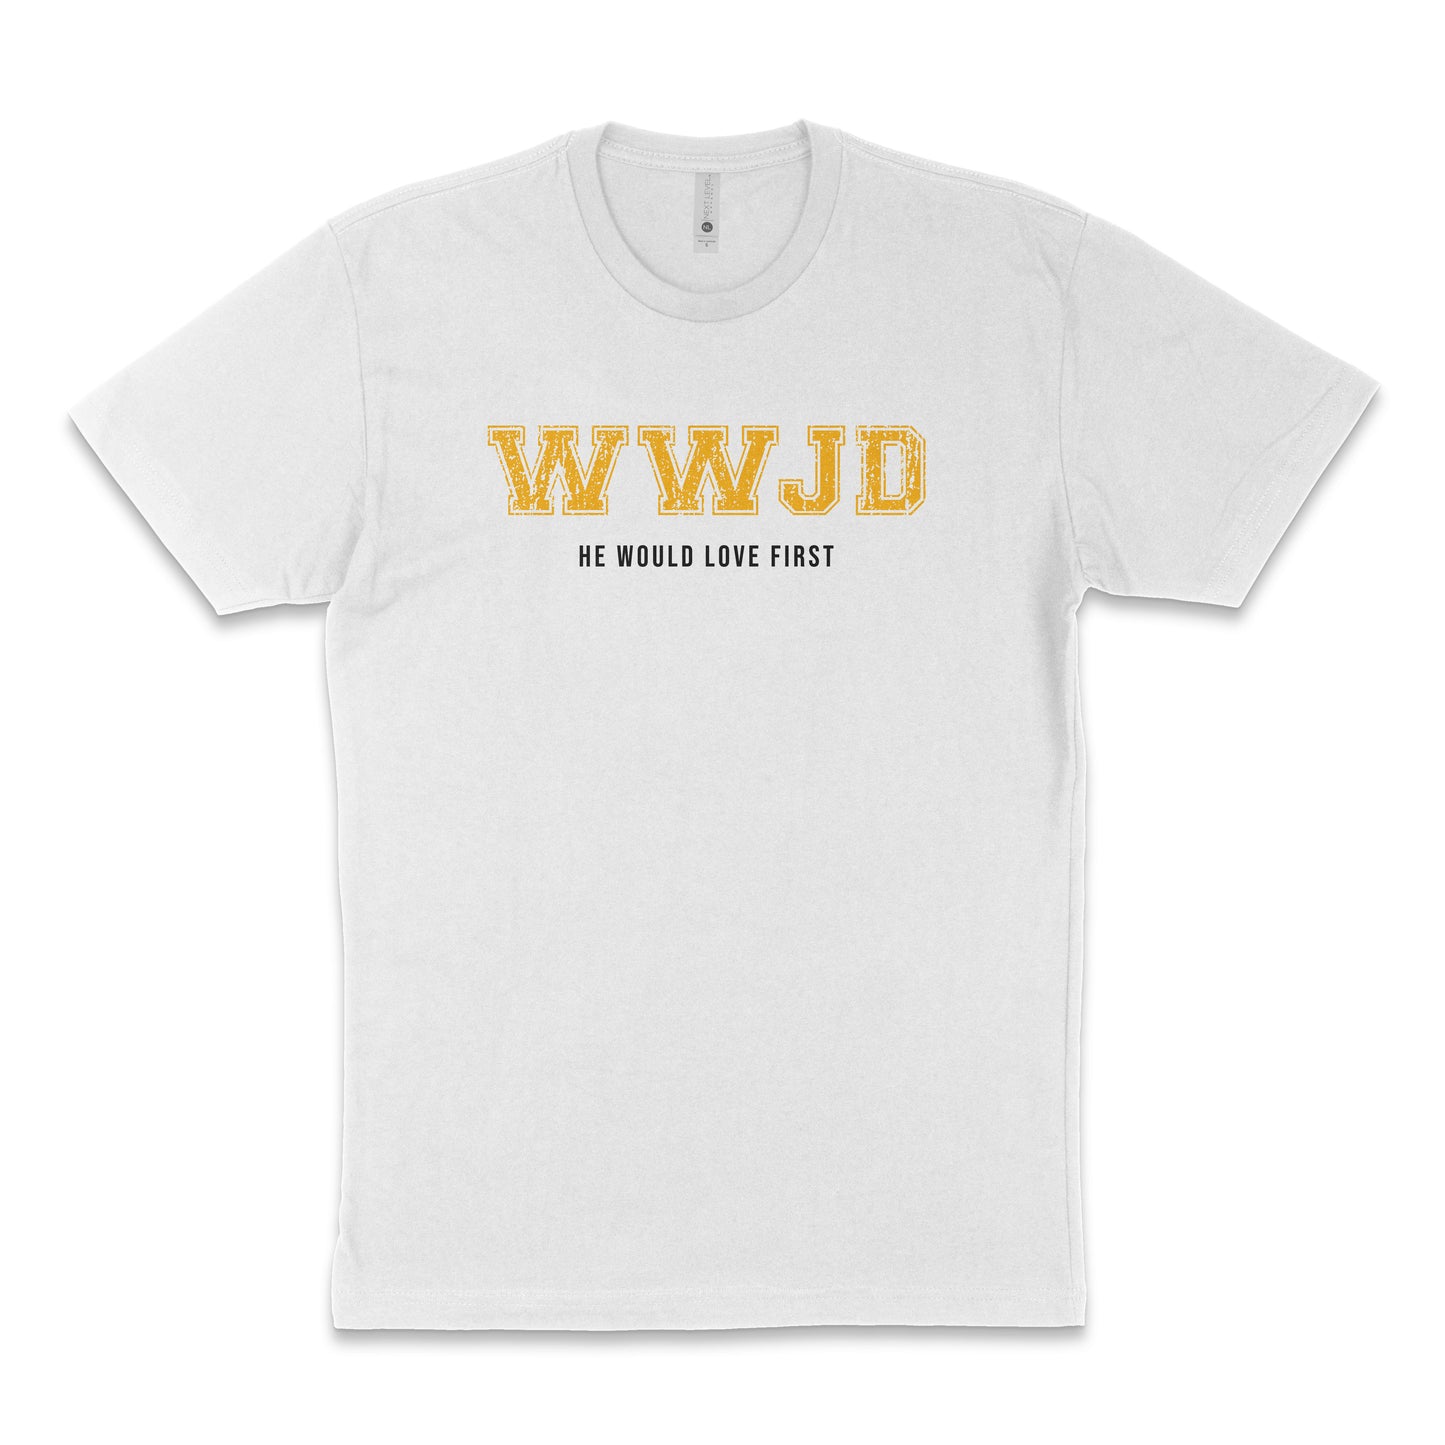 Retro College WWJD He Would Love First T-Shirt